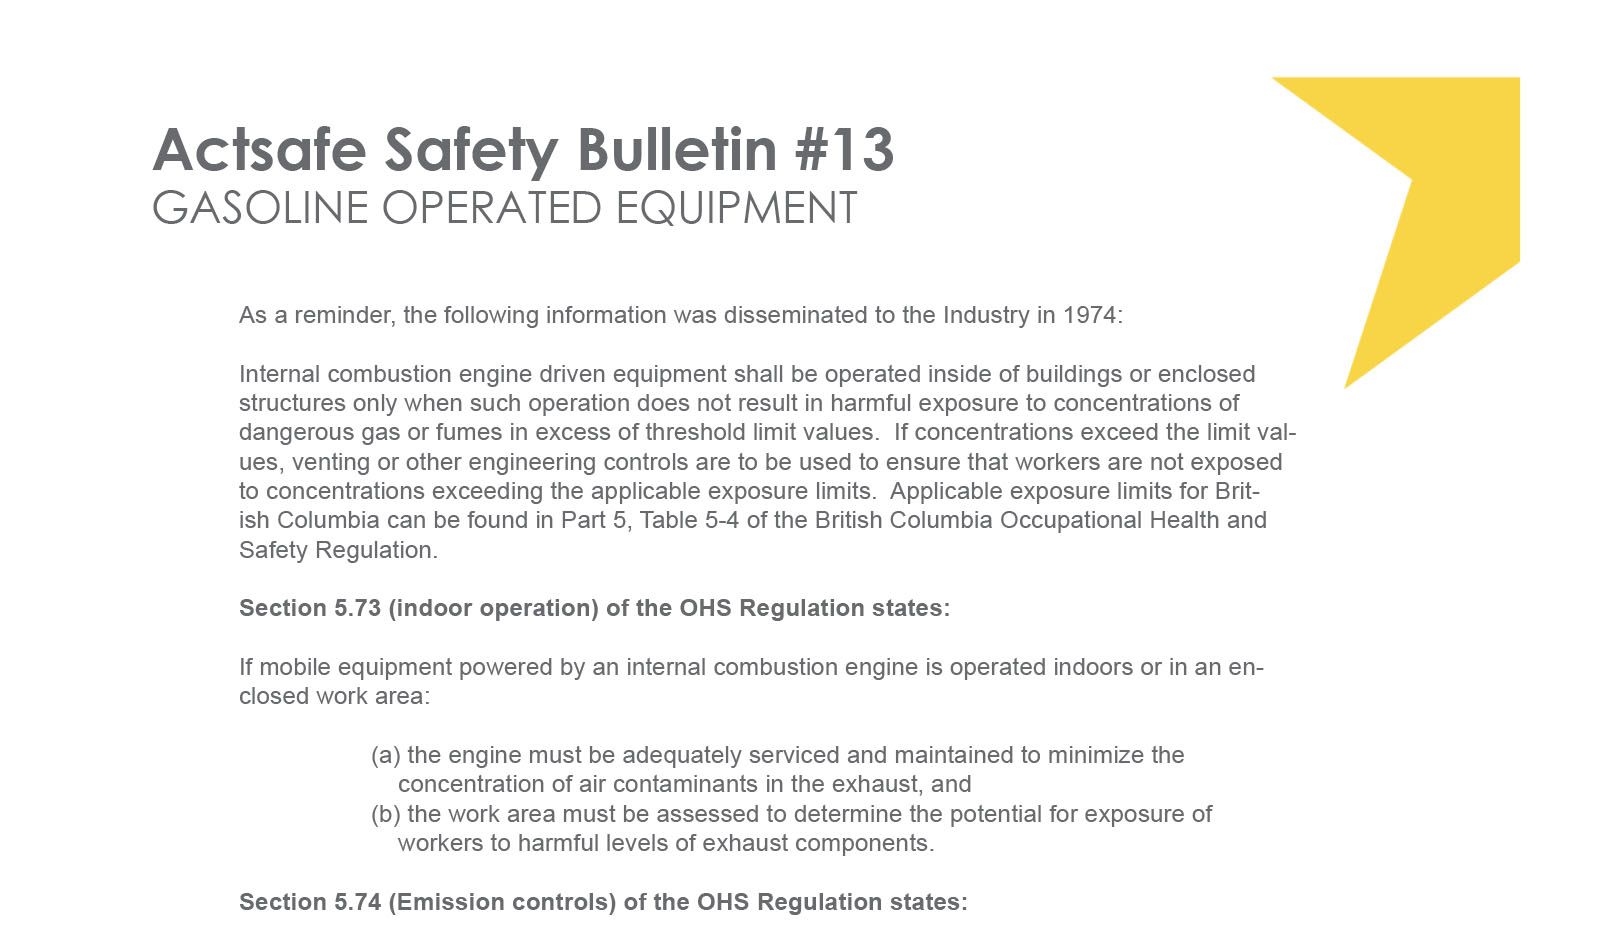 #13 Gas Operated Equipment Motion Picture Safety Bulletin